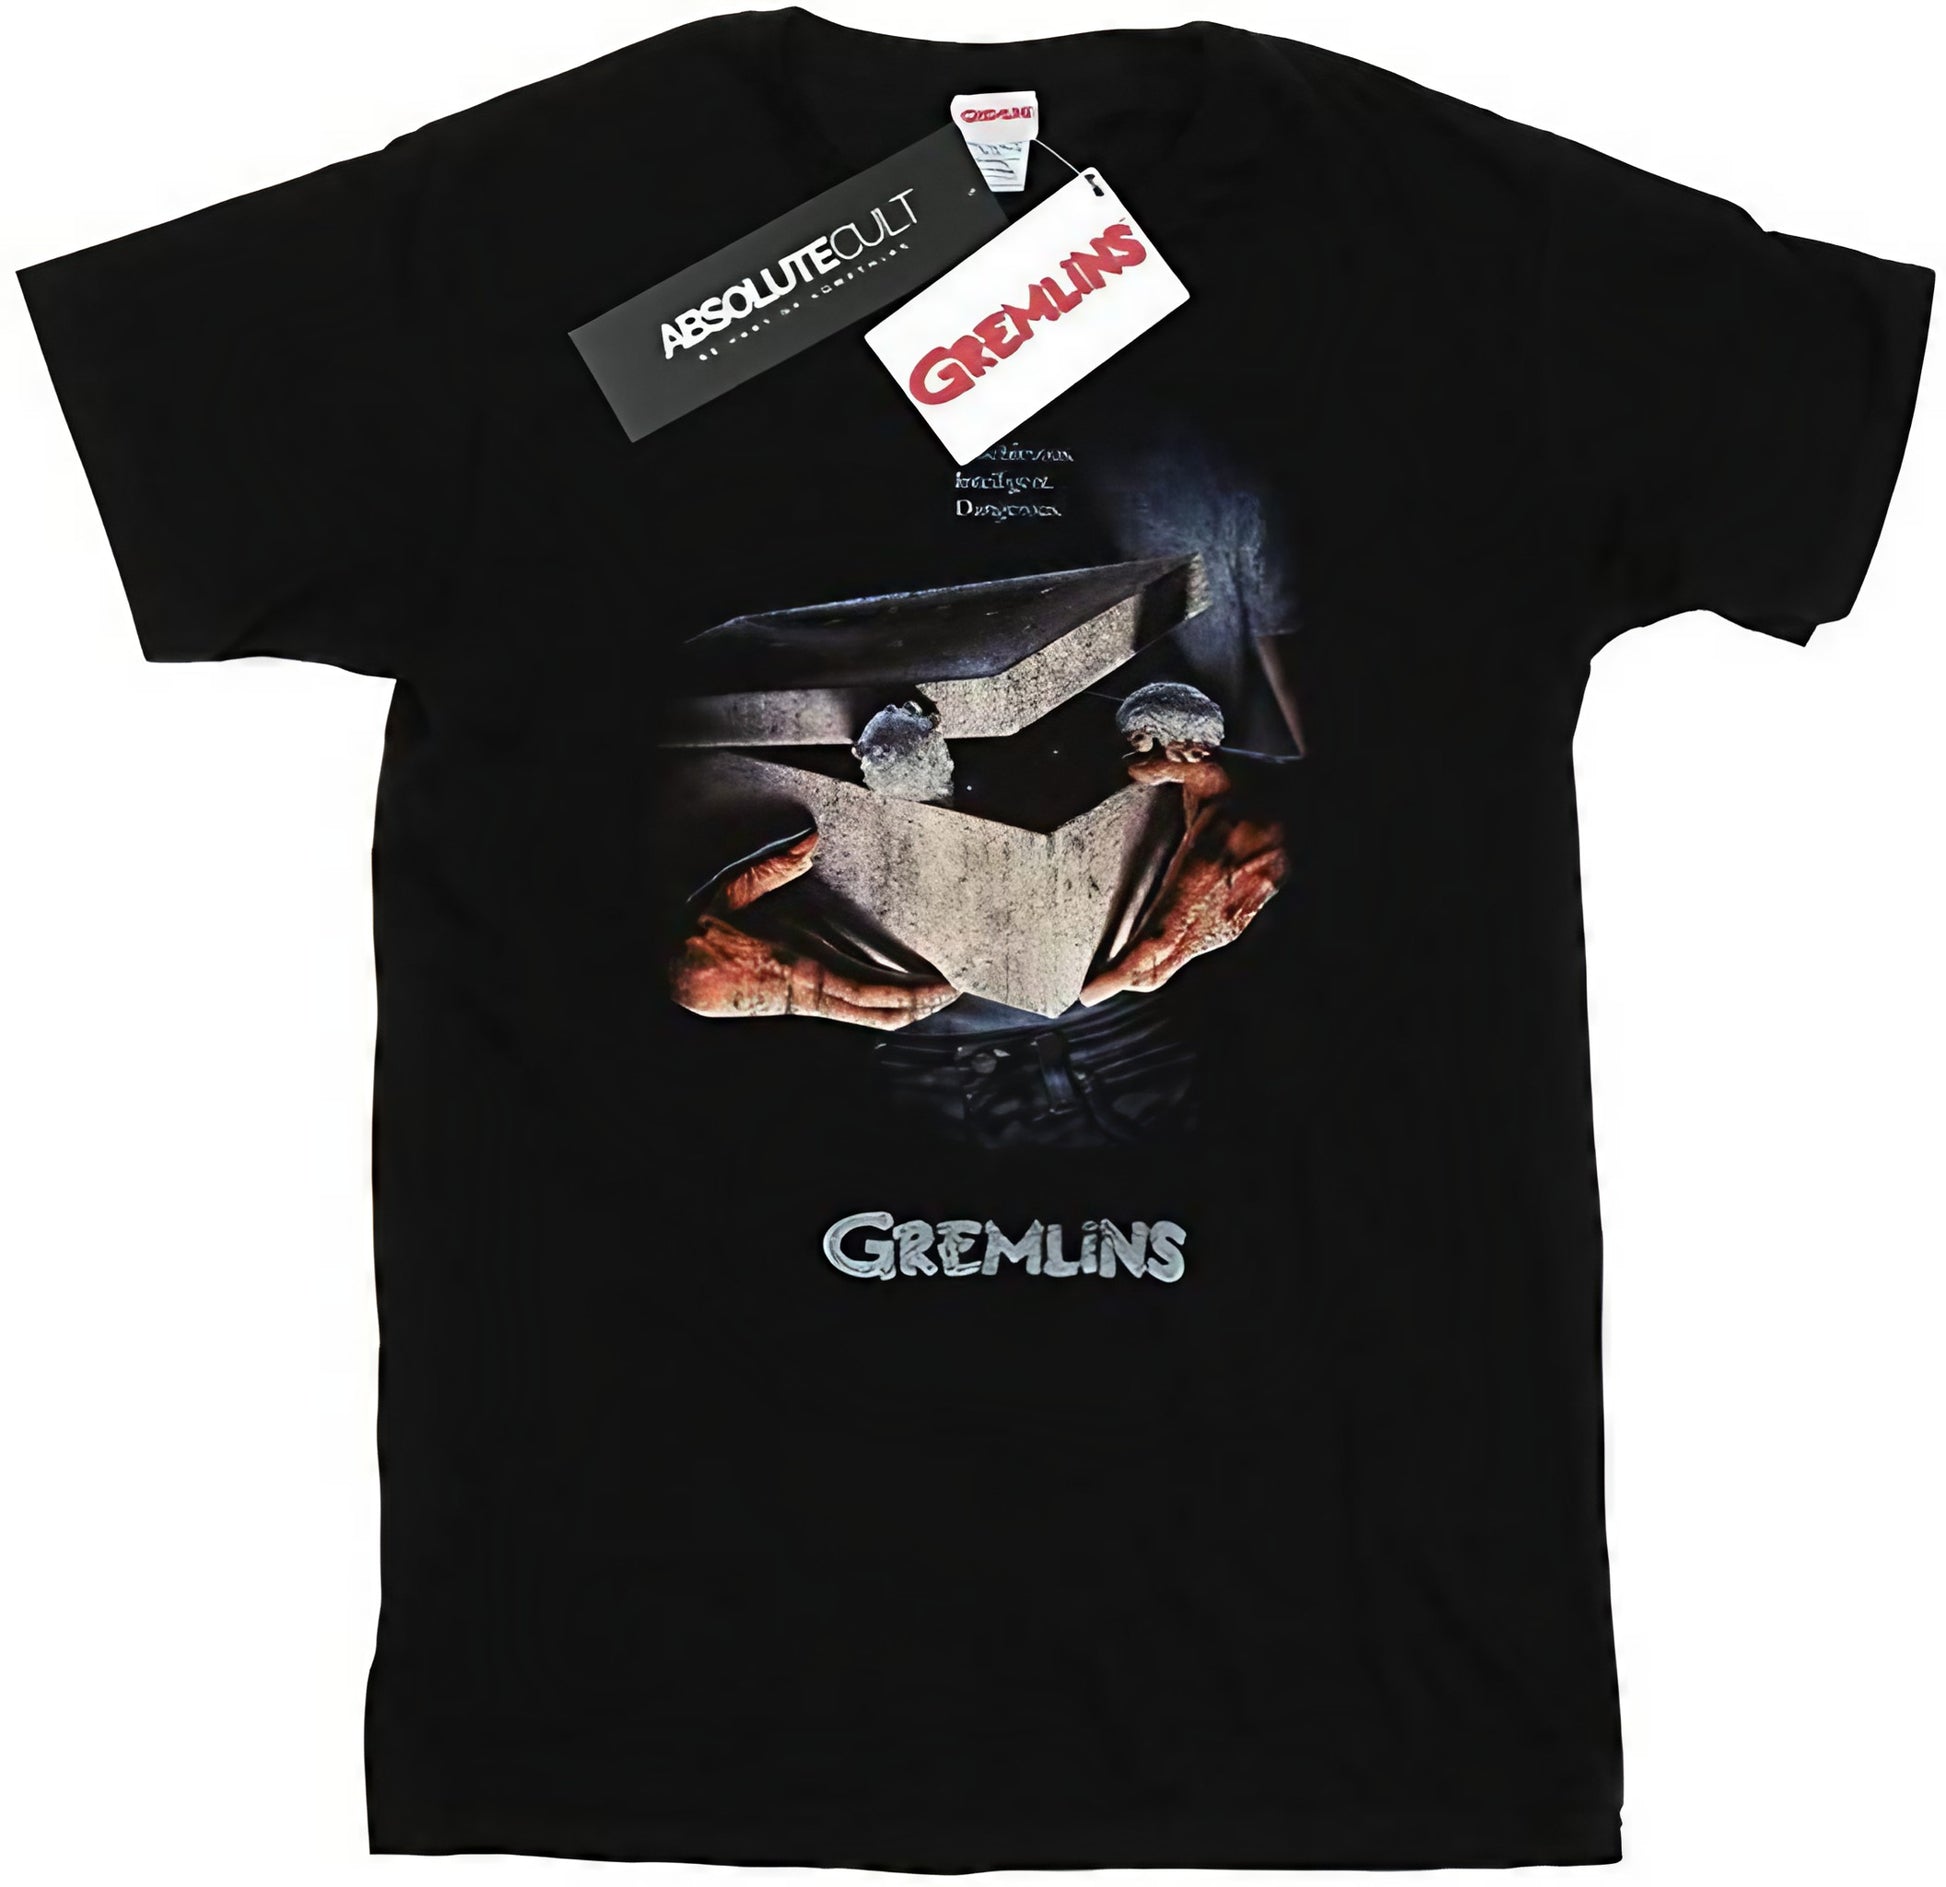 GREMLINS movie themed t-shirt with distressed Gizmo graphic